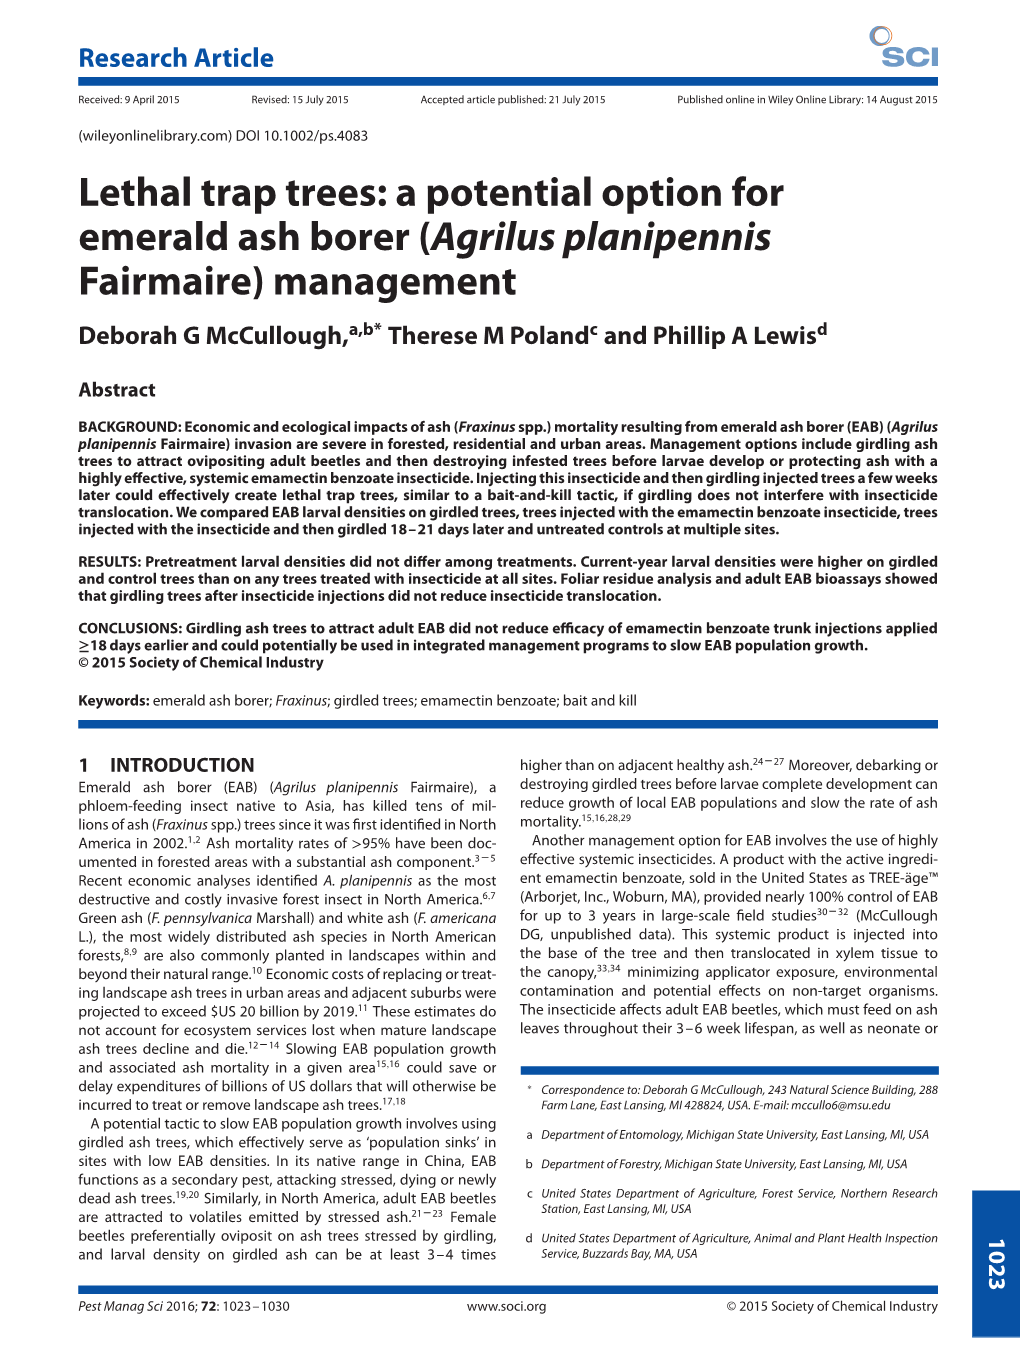 Lethal Trap Trees: a Potential Option for Emerald Ash Borer